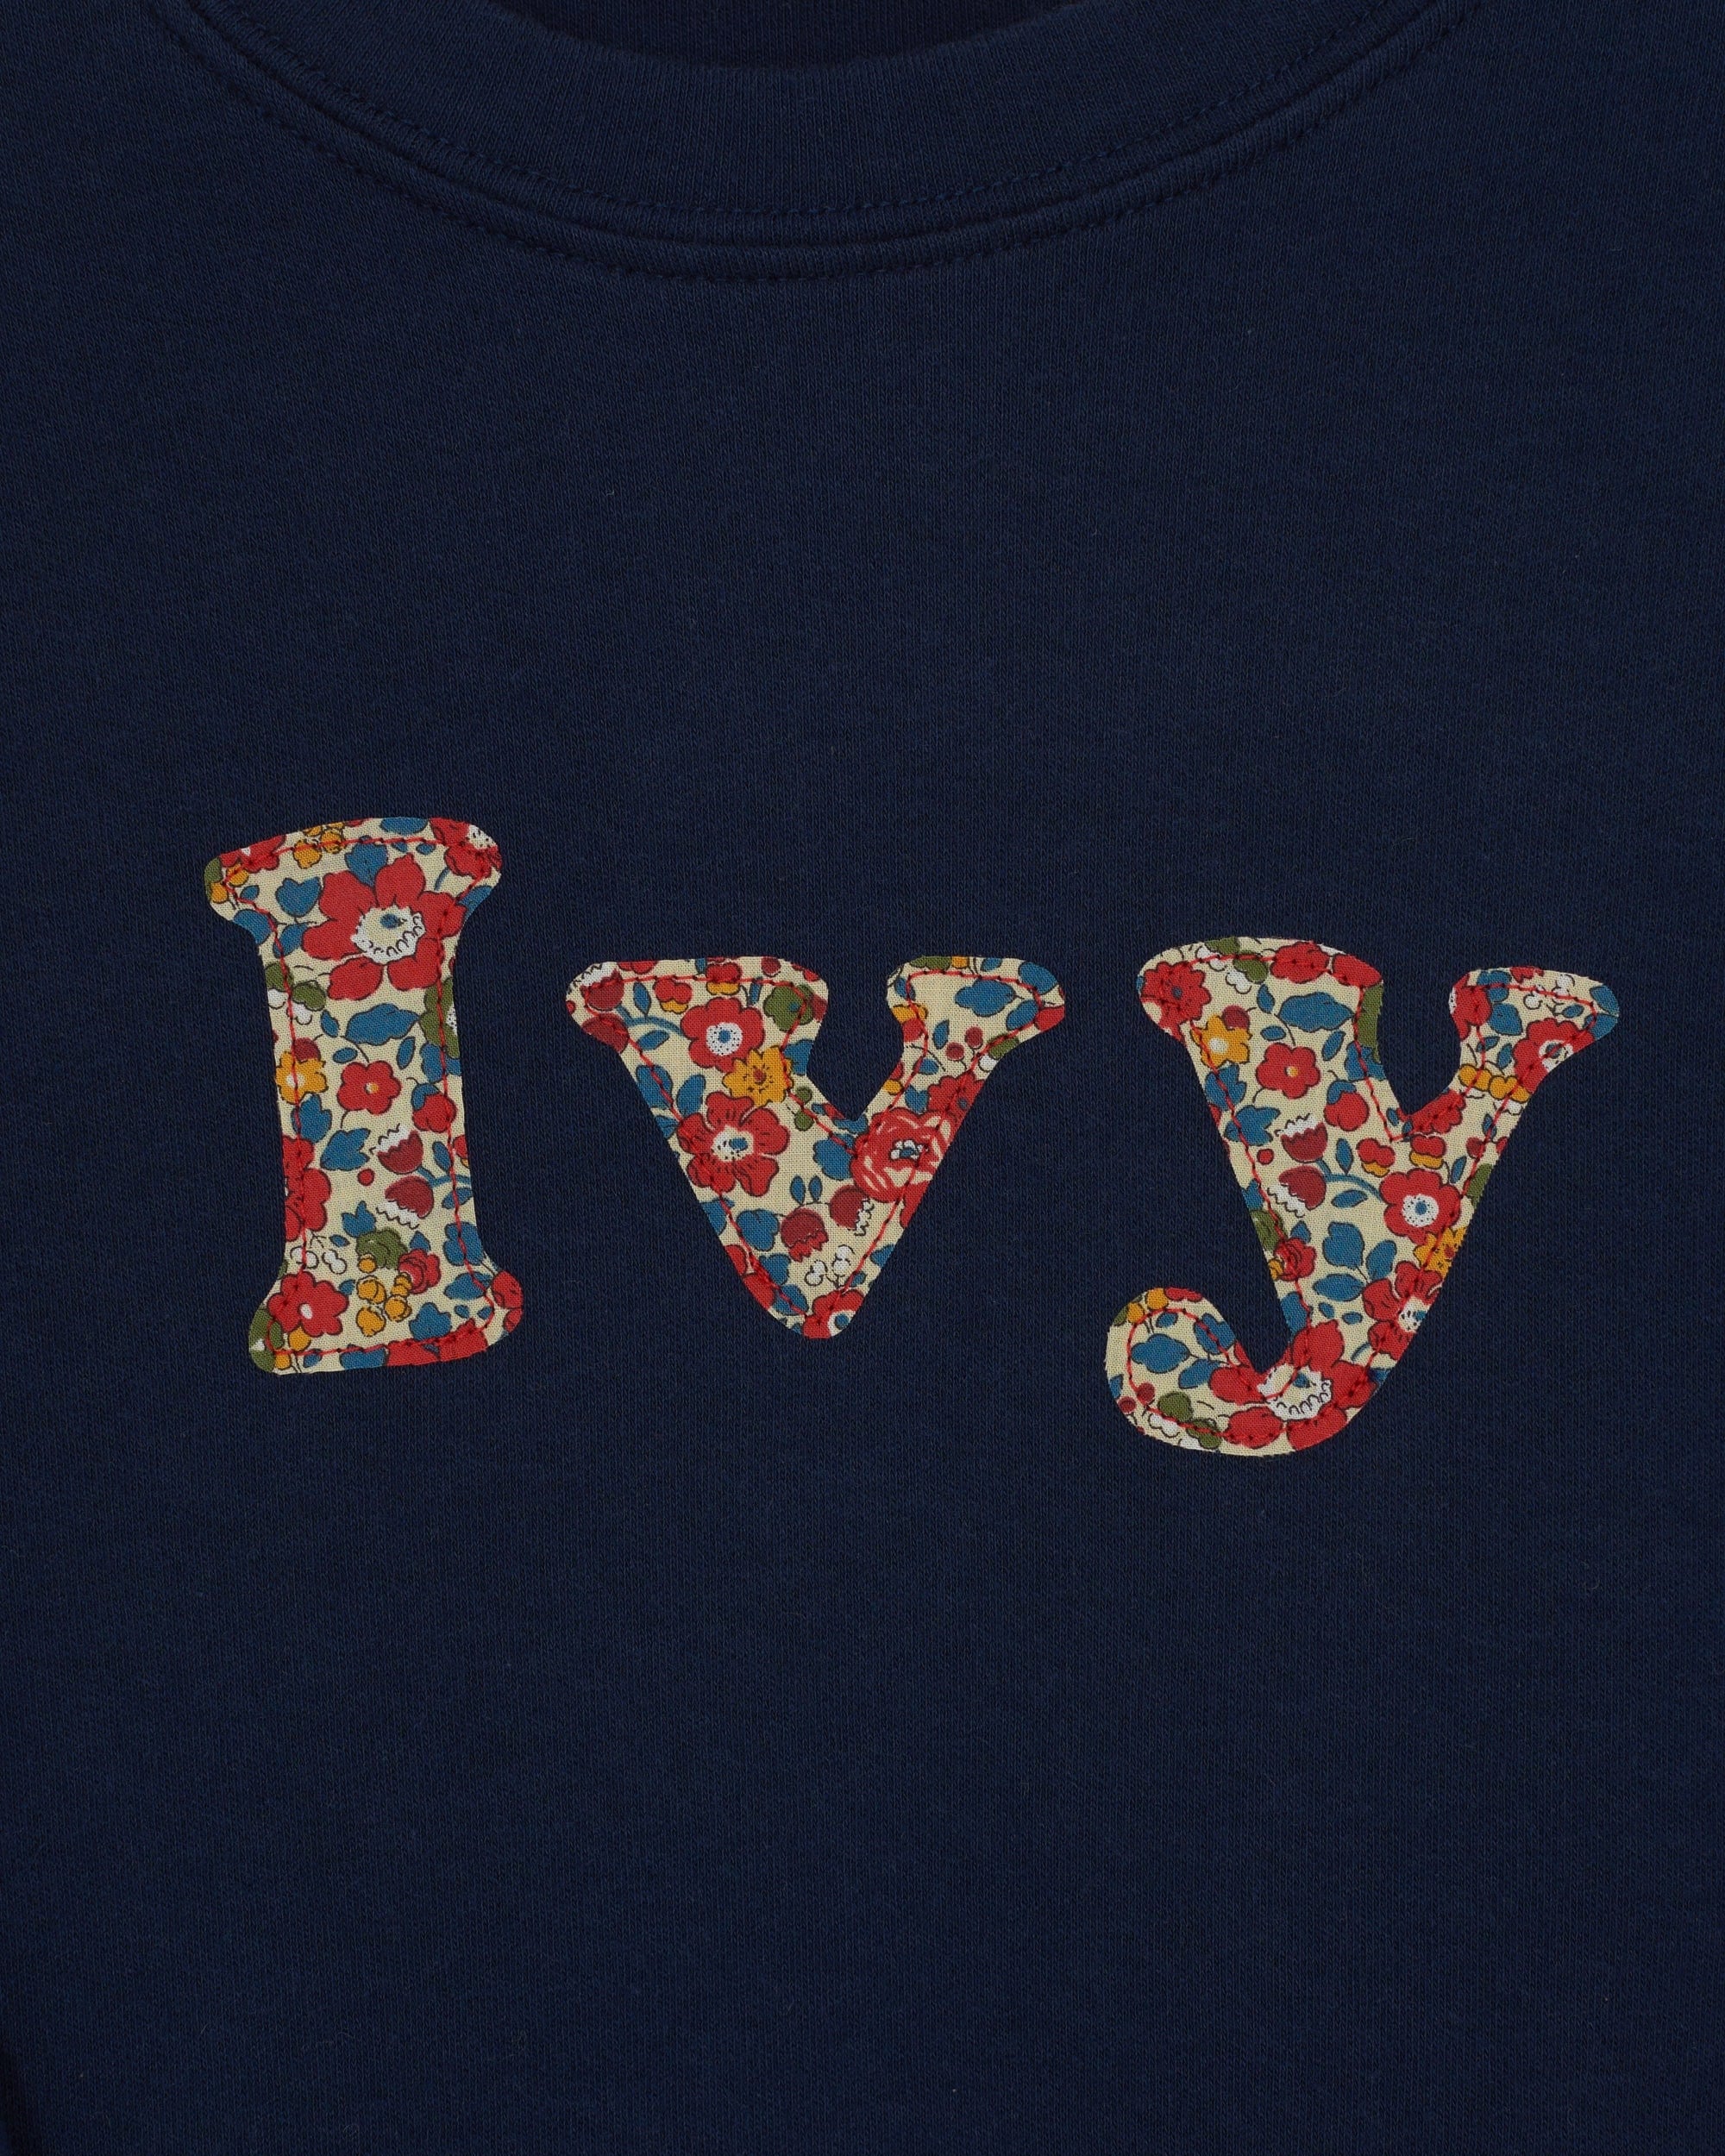 Magnificent Stanley Tee Lowercase Name T-Shirt in Choice of Liberty Print